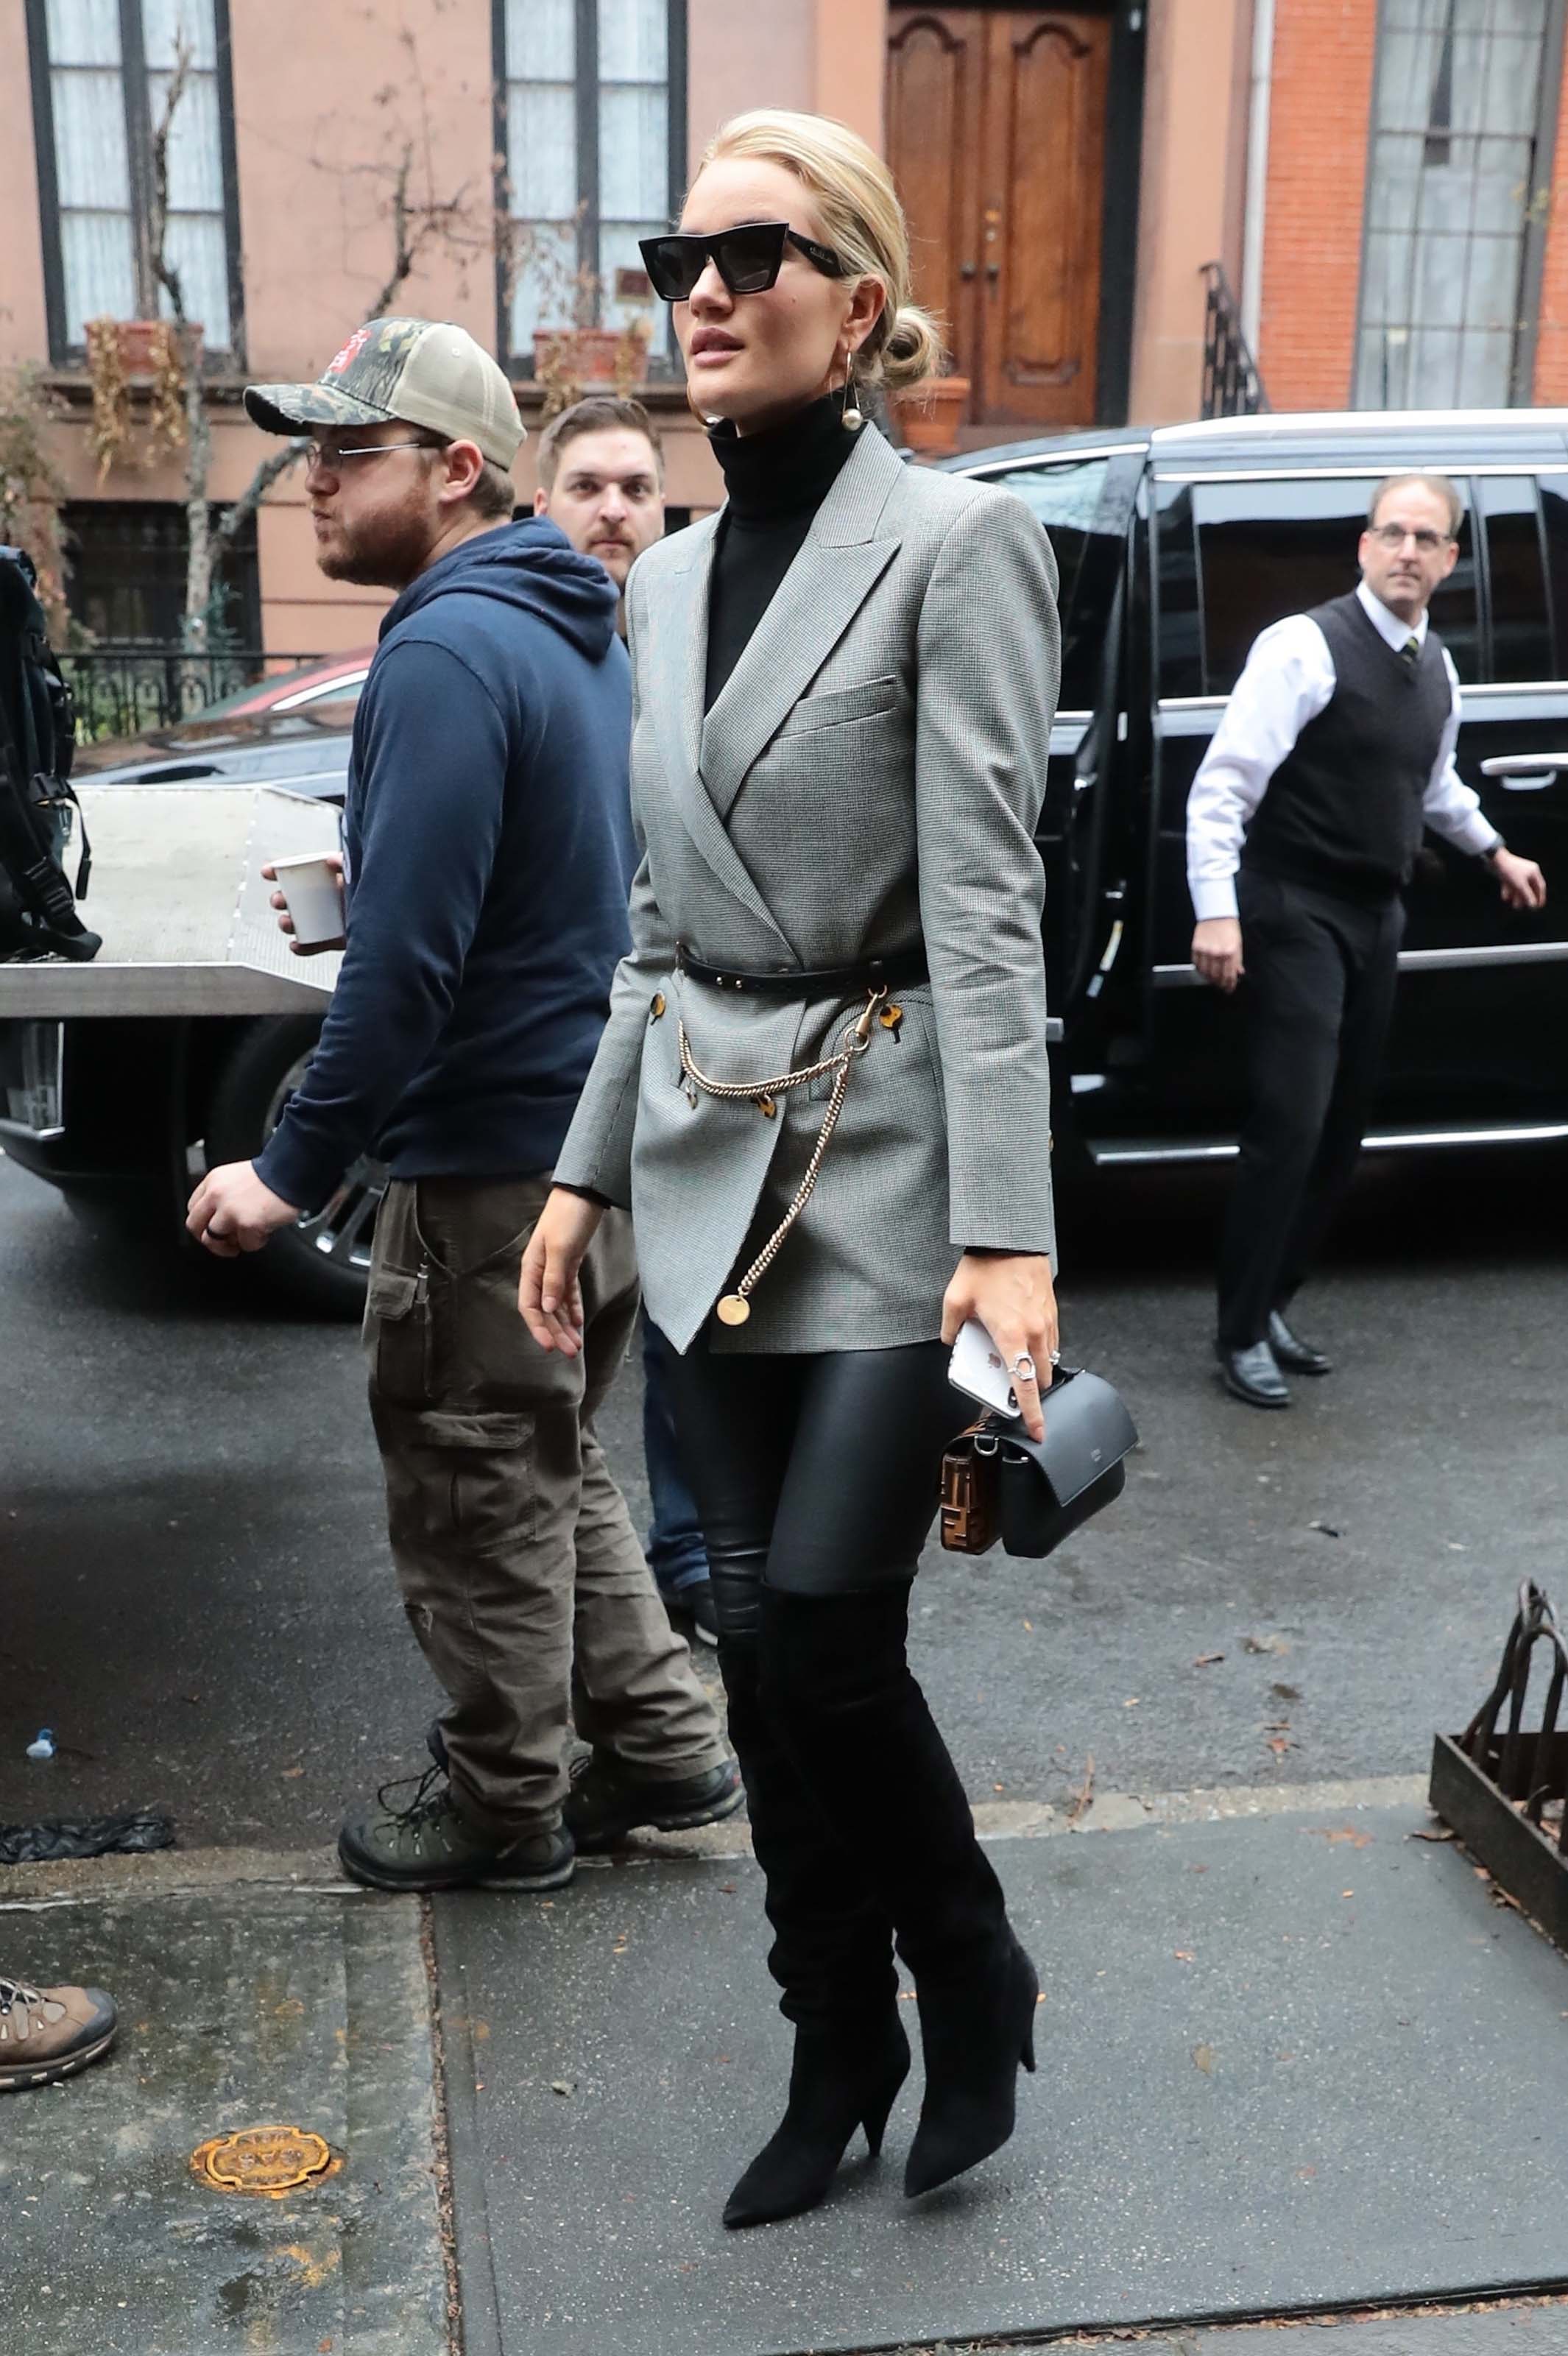 Rosie Huntington-Whiteley shows off her high fashion look